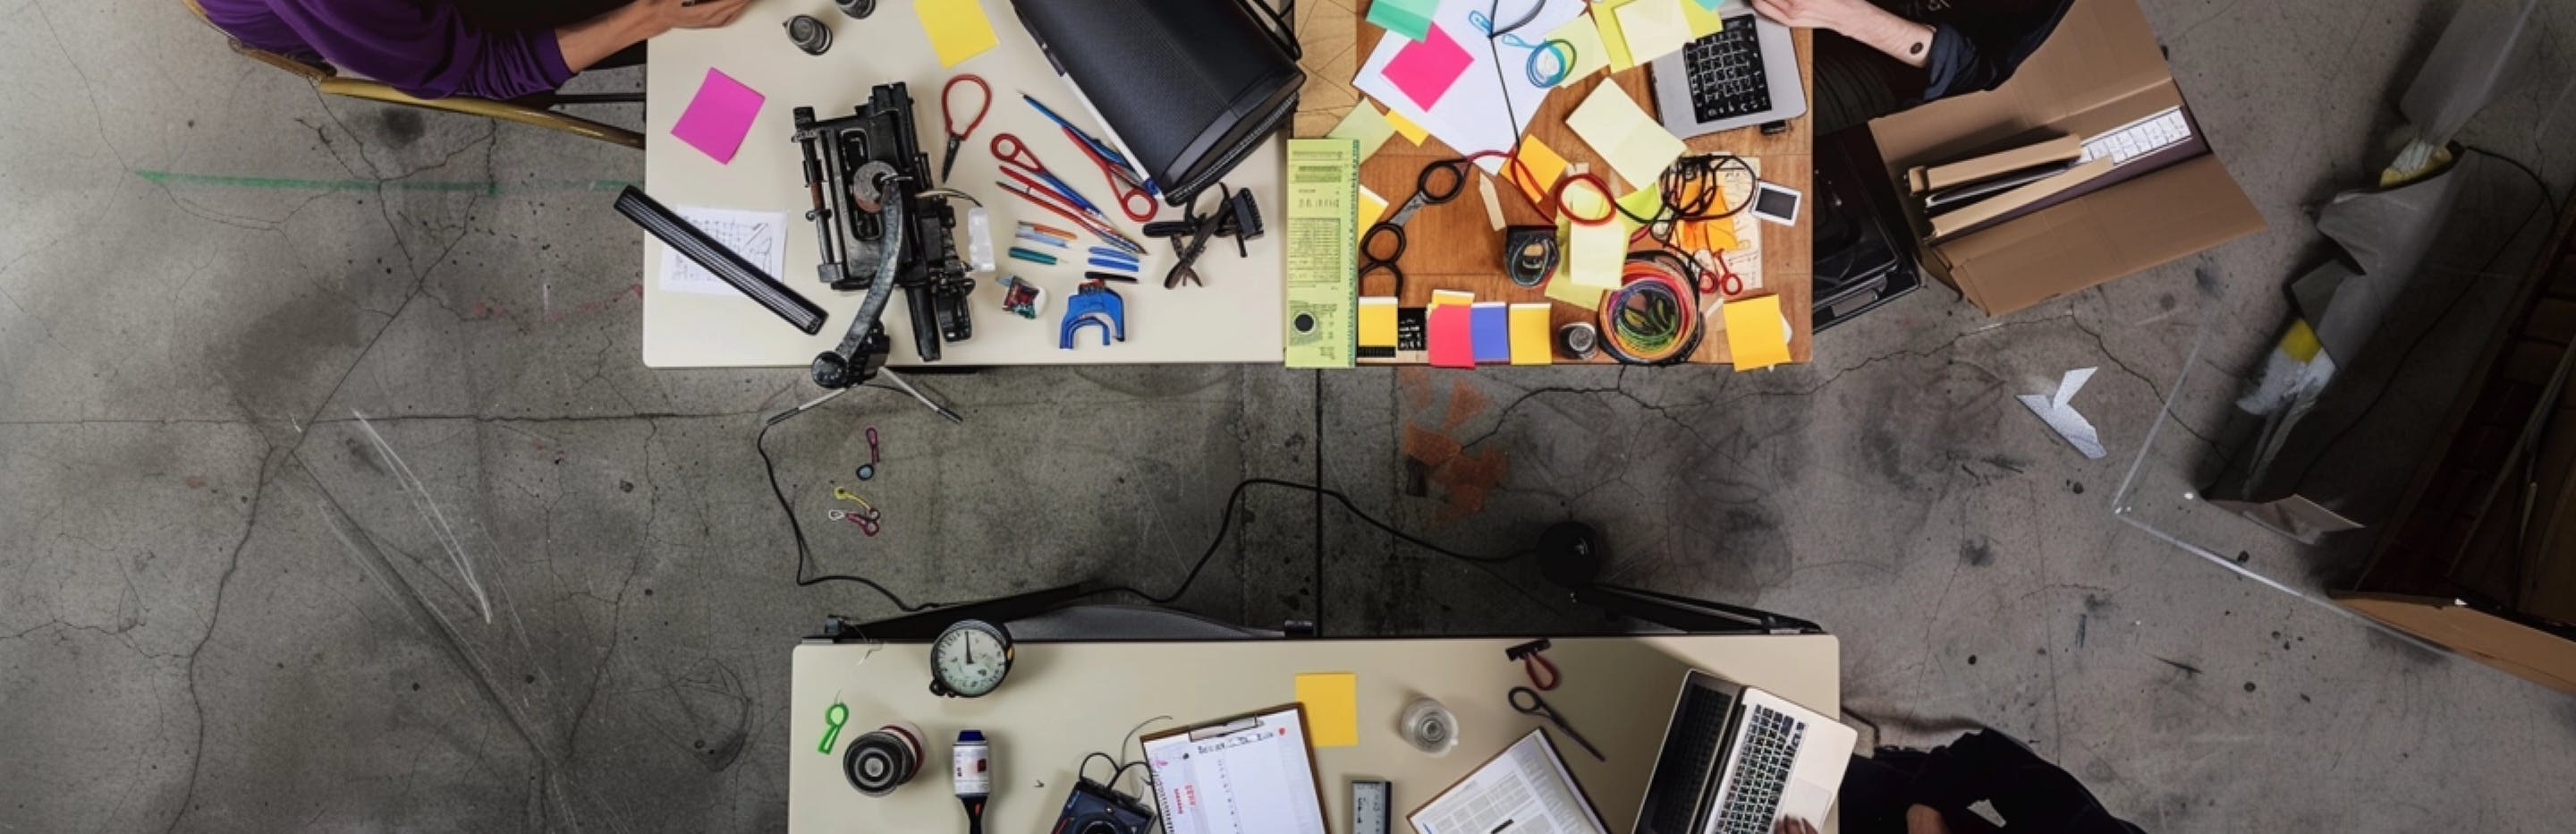 Desks covered with multiple tools used for creative work